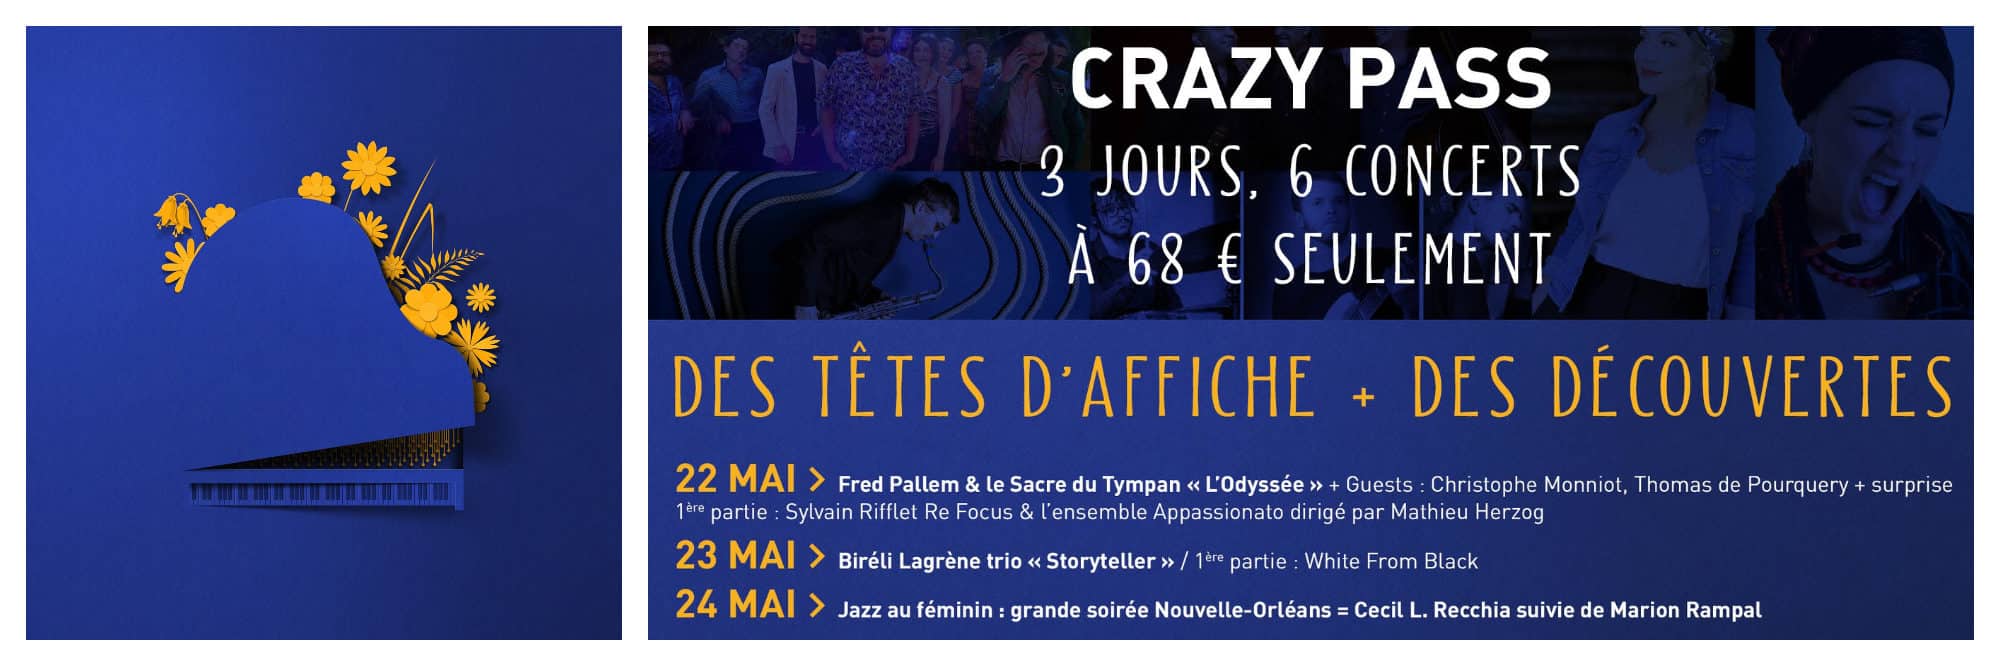 The Crazy Pass allows you to see some of the best concerts in Paris.